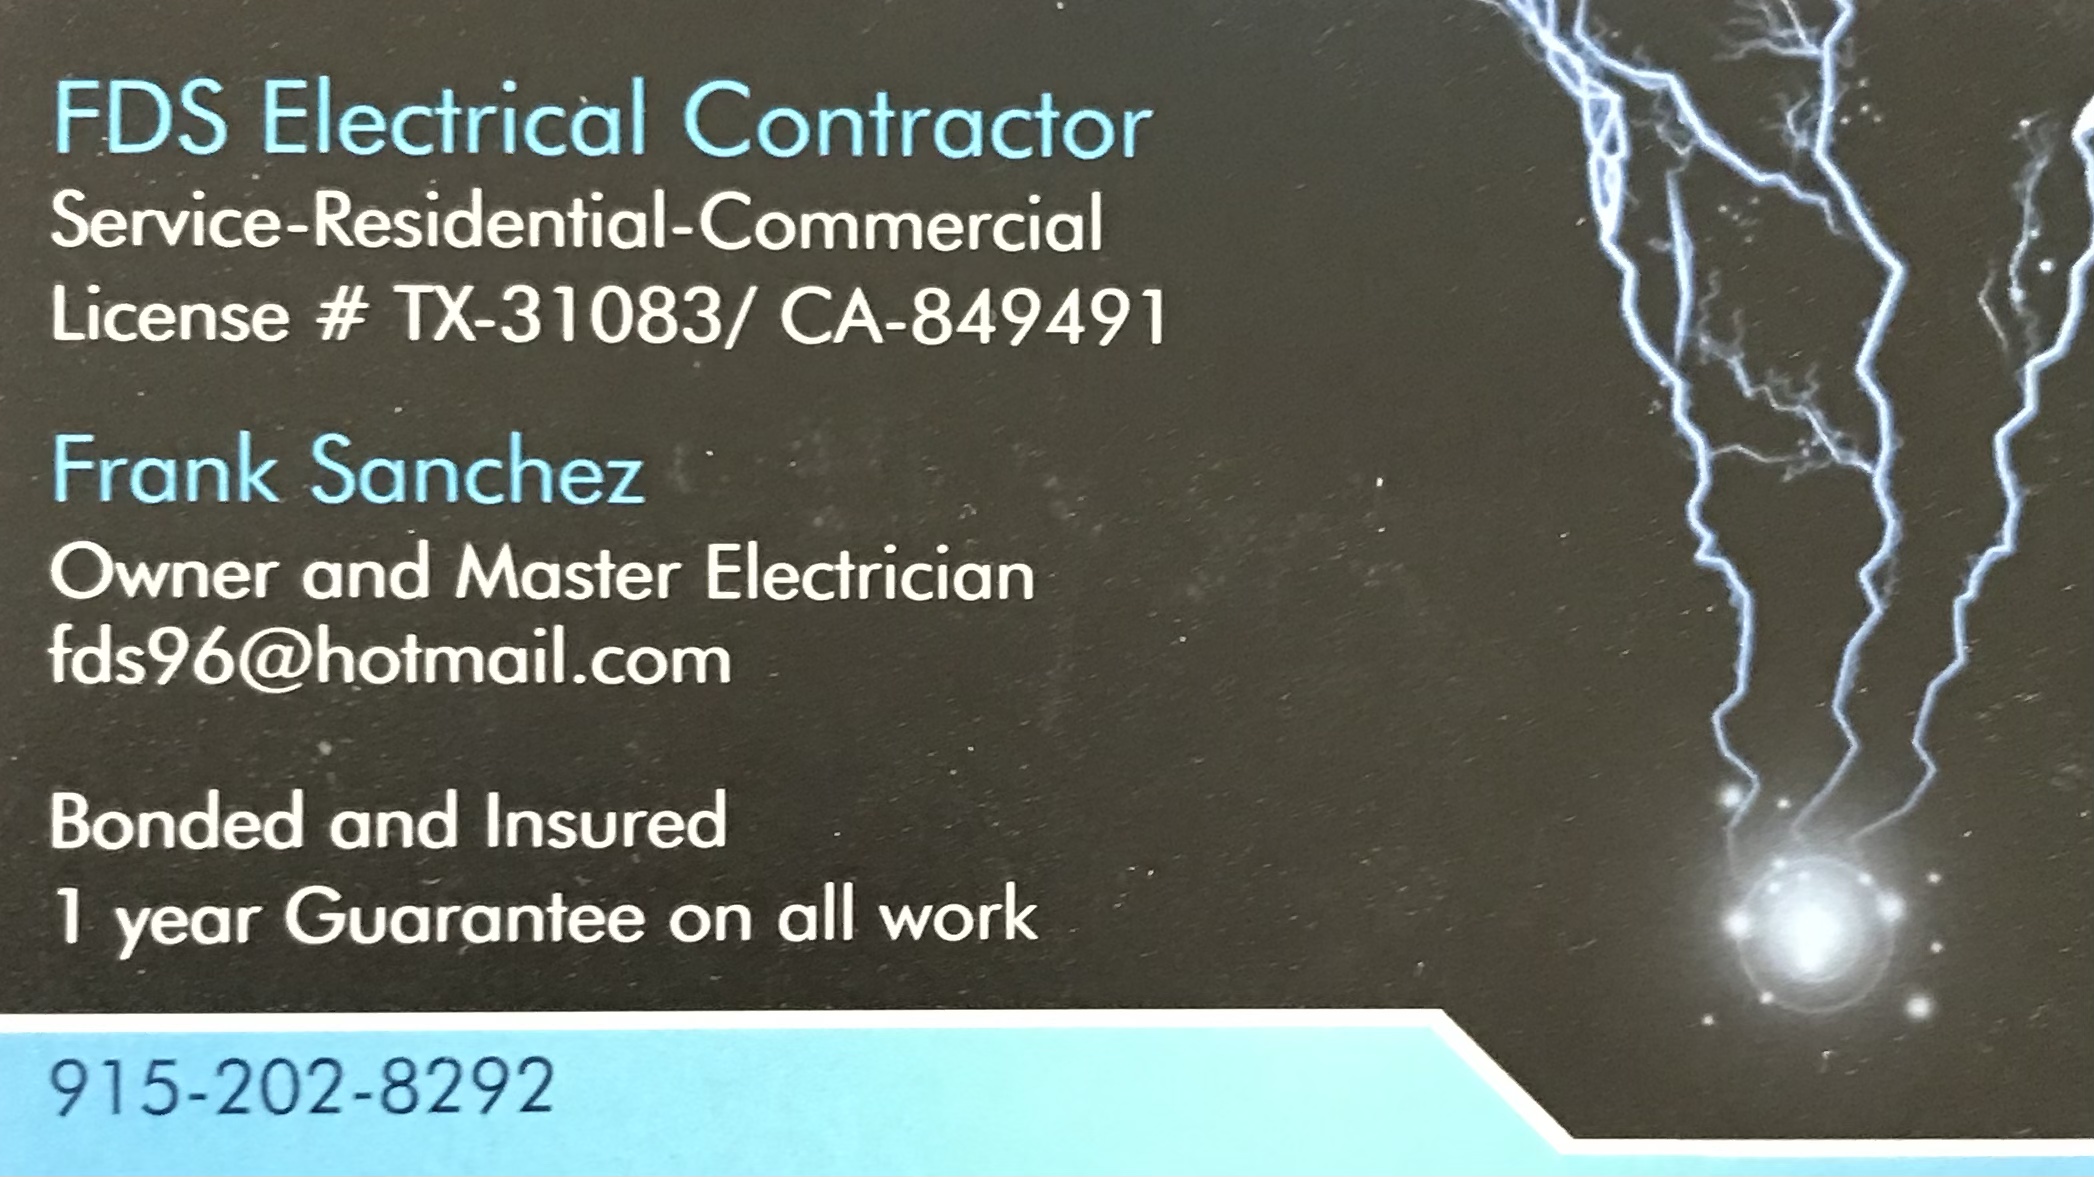 FDS Electrical Contractor Logo